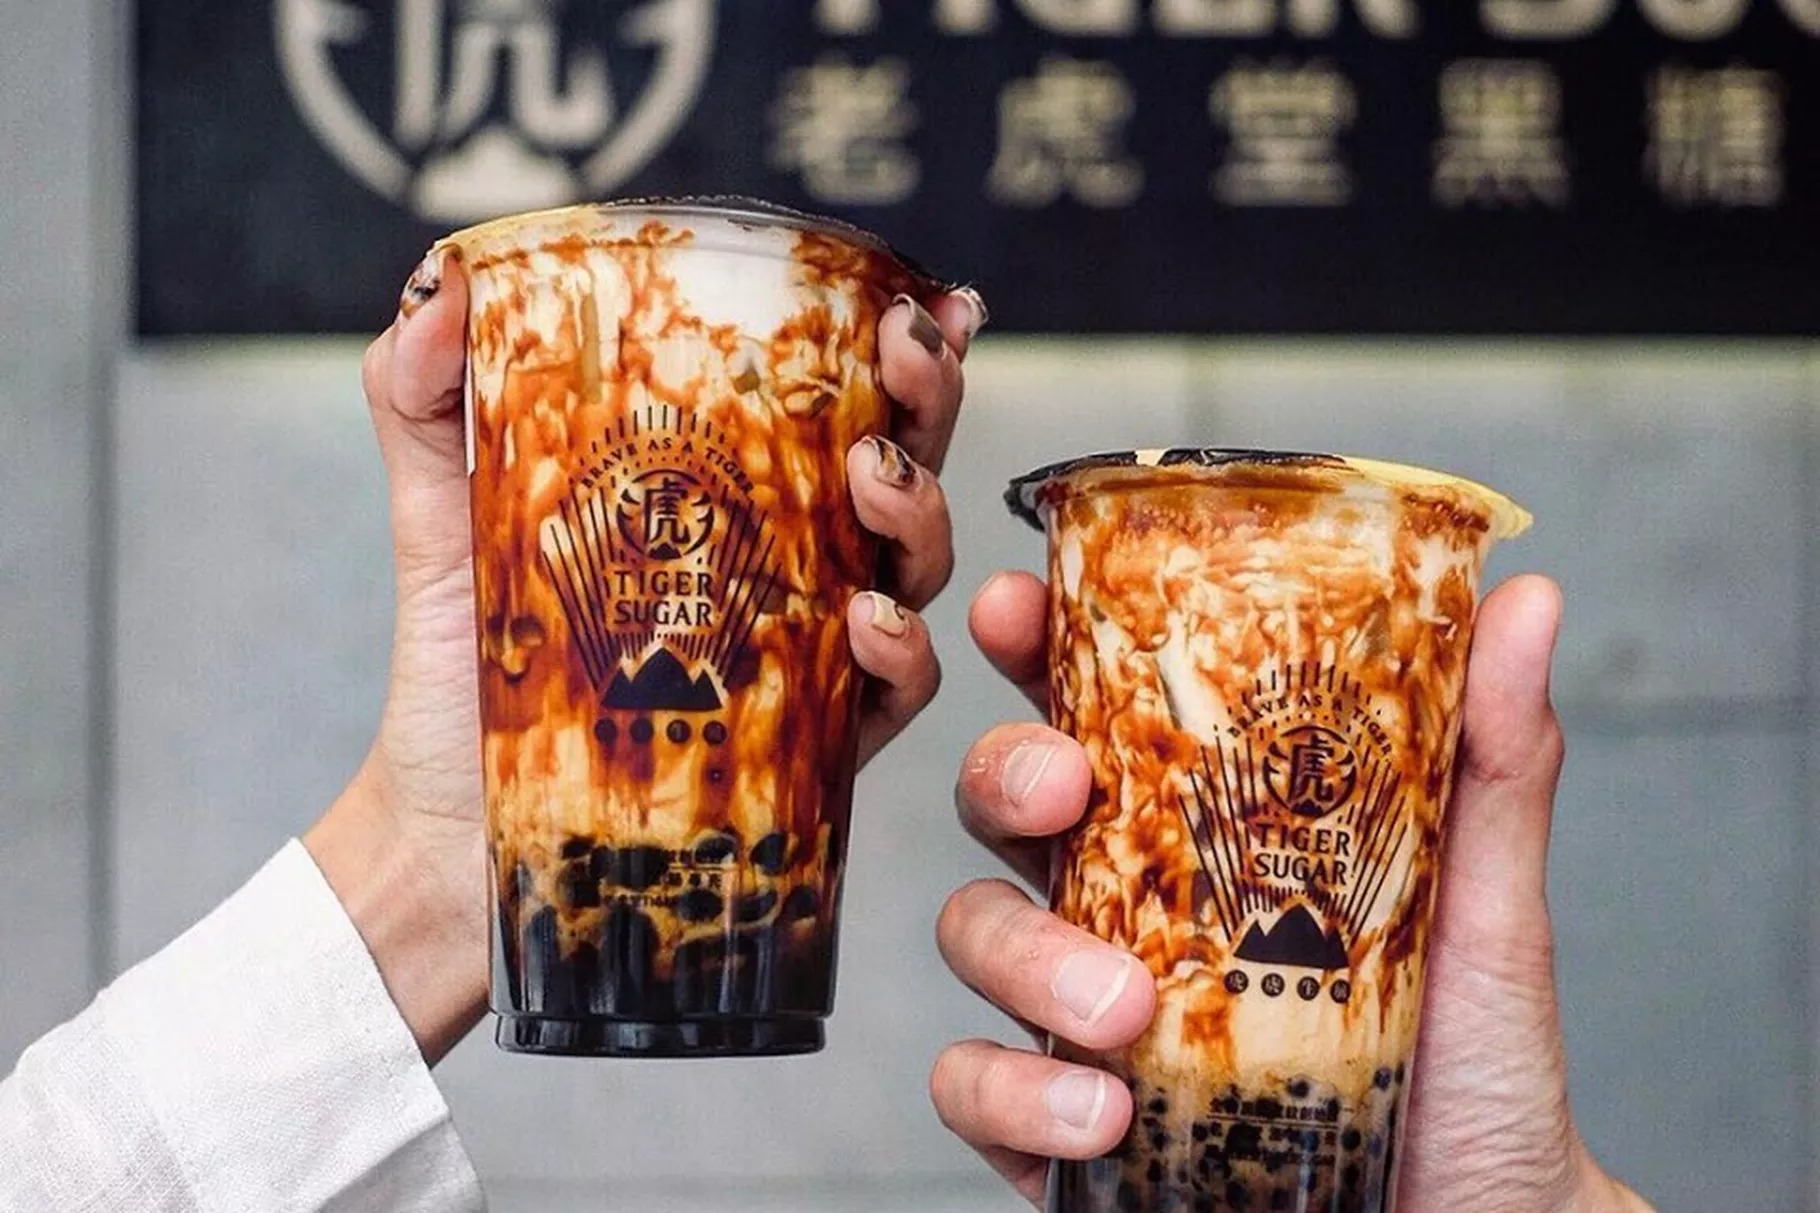 Two hands hold cups of brown sugar boba from Taiwanese chain Tiger Sugar. The iced tea drink is milky white with streaks of dark brown.